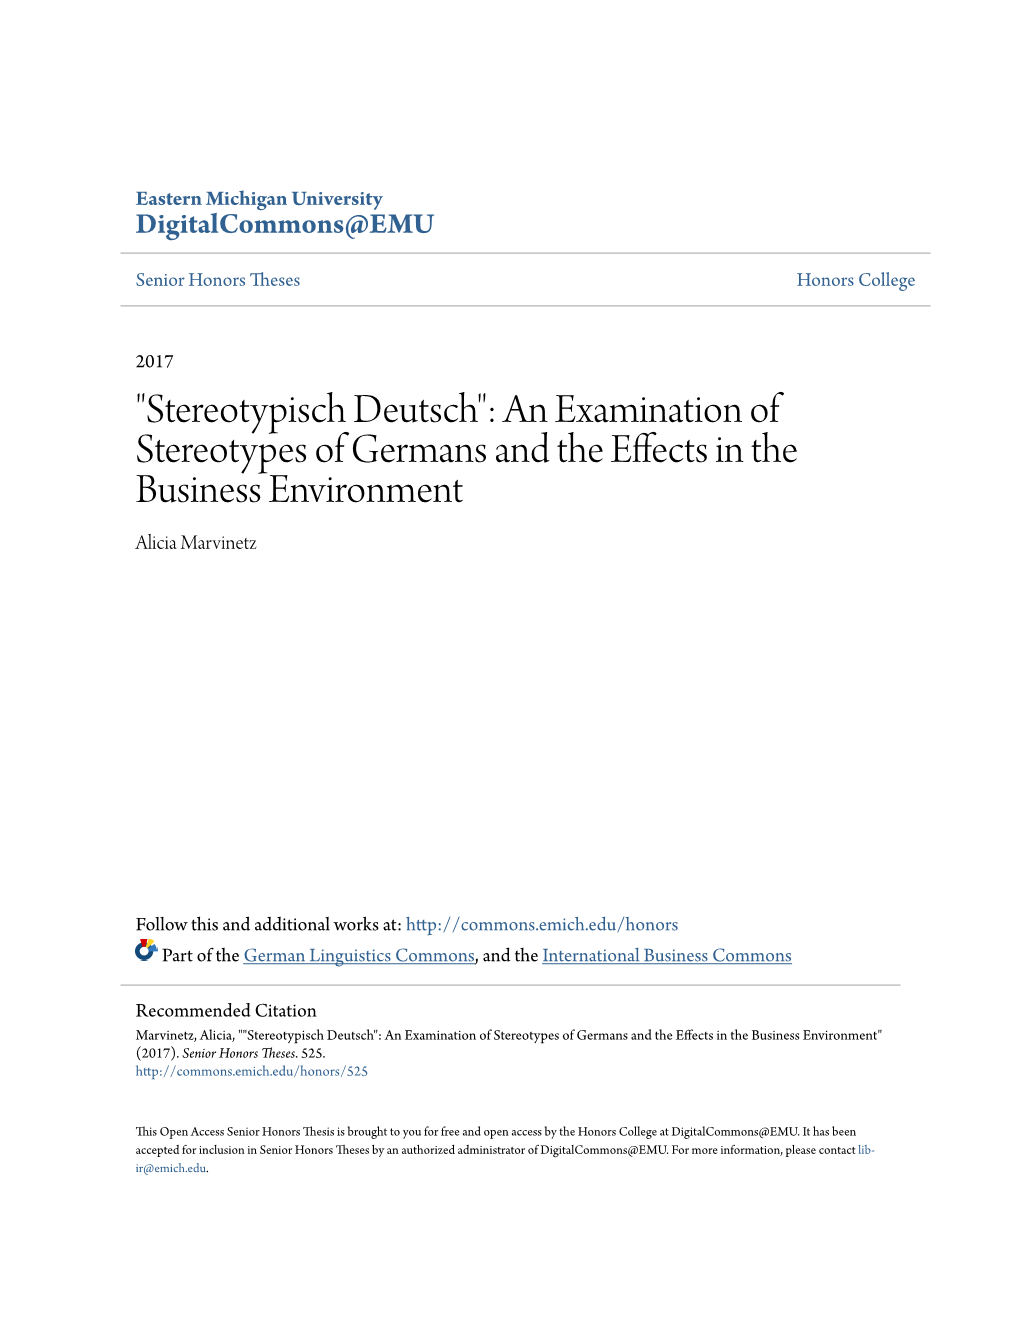 "Stereotypisch Deutsch": an Examination of Stereotypes of Germans and the Effects in the Business Environment Alicia Marvinetz